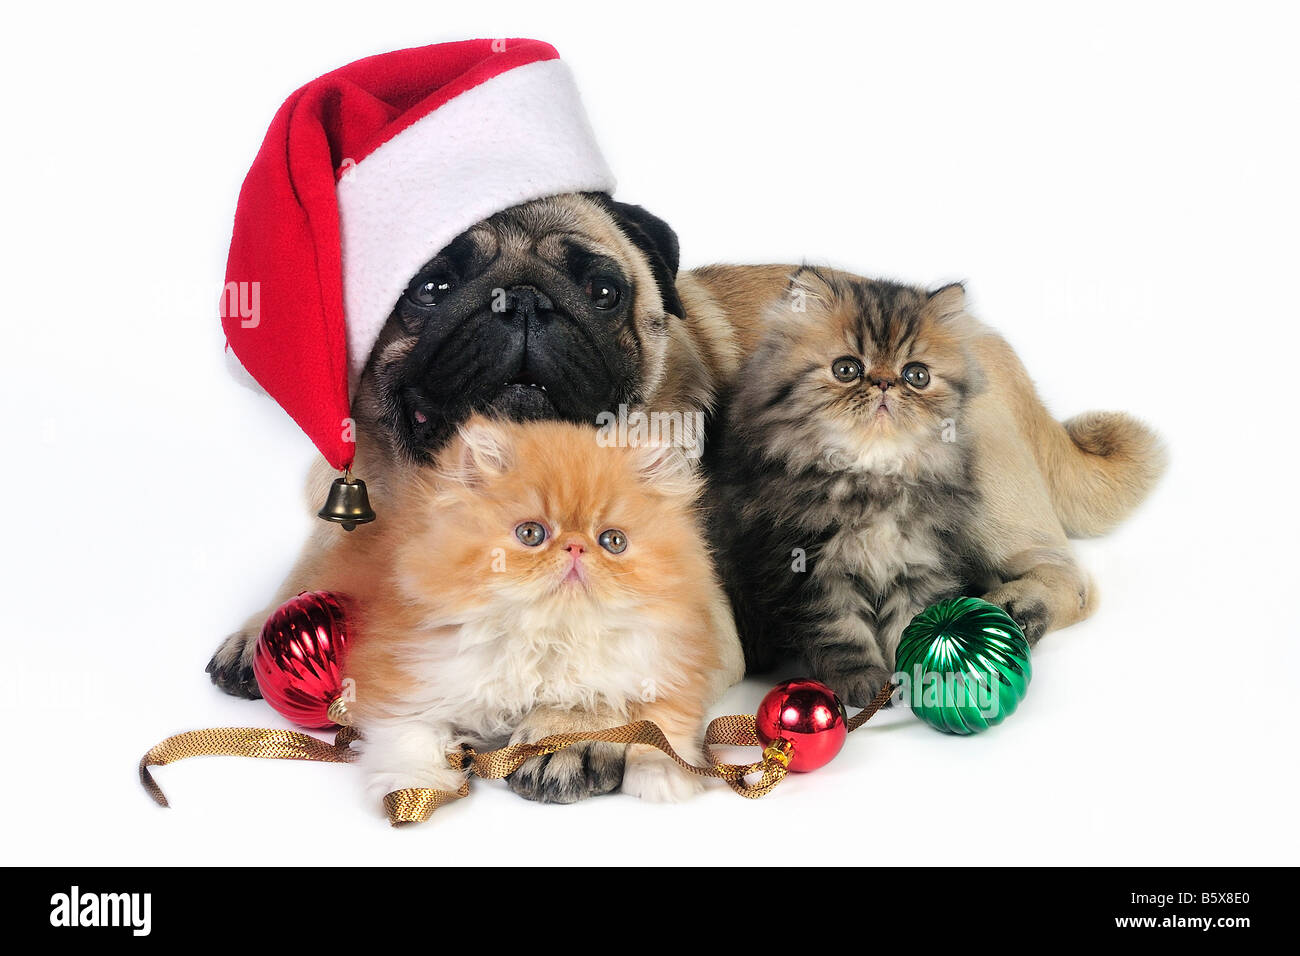 Pug dog wearing Santa hat with two little Persian kittens, surrounded by Christmas ornaments. Stock Photo